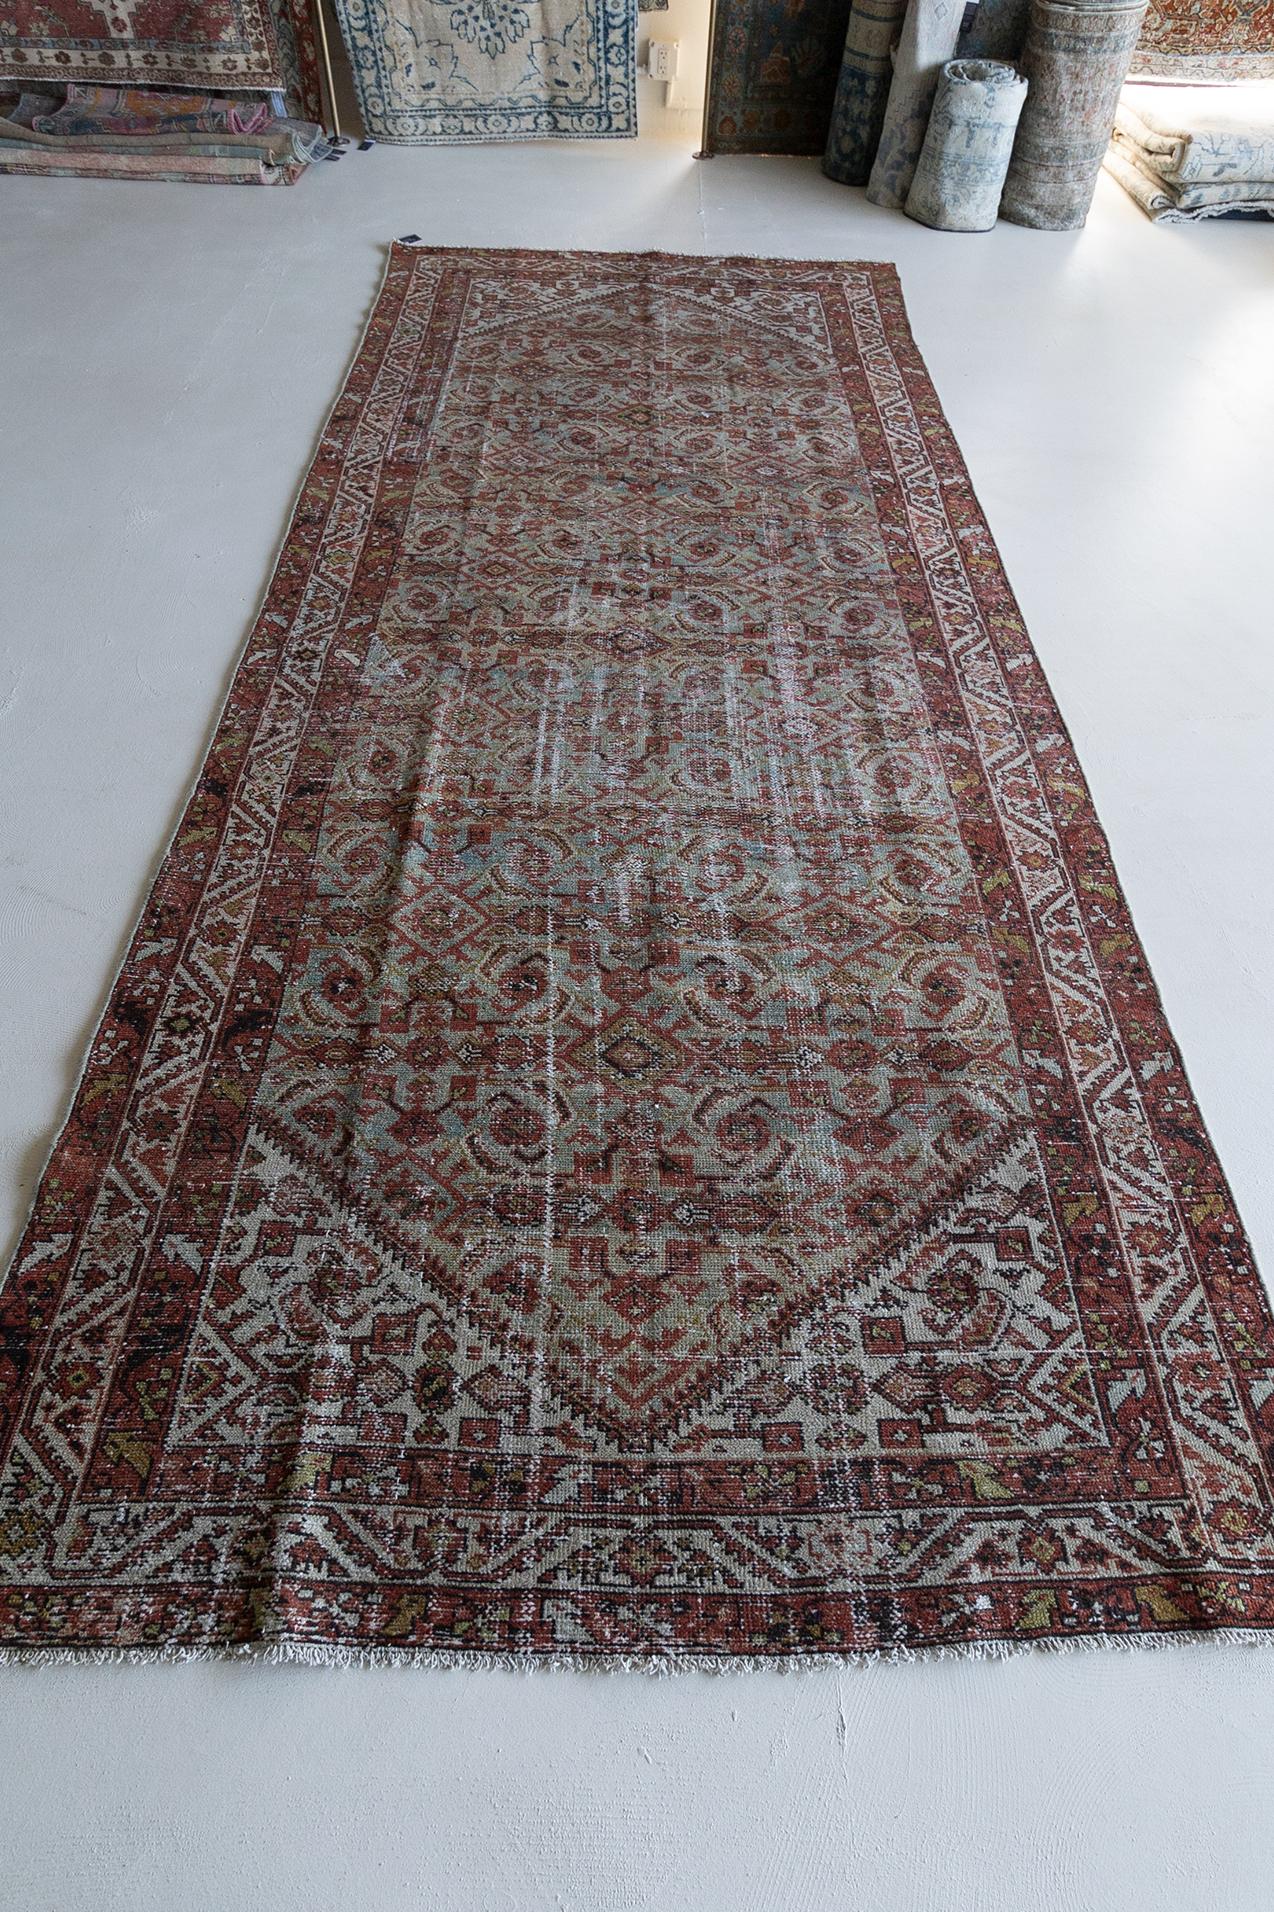 Age: Circa 1920

Colors: Persian Plum, Black and Spice on a blue field. 

Pile: low.

Material: Wool on Cotton.

Wear Notes: 3

Wear Guide:
Vintage and antique rugs are by nature, pre-loved and may show evidence of their past. There are